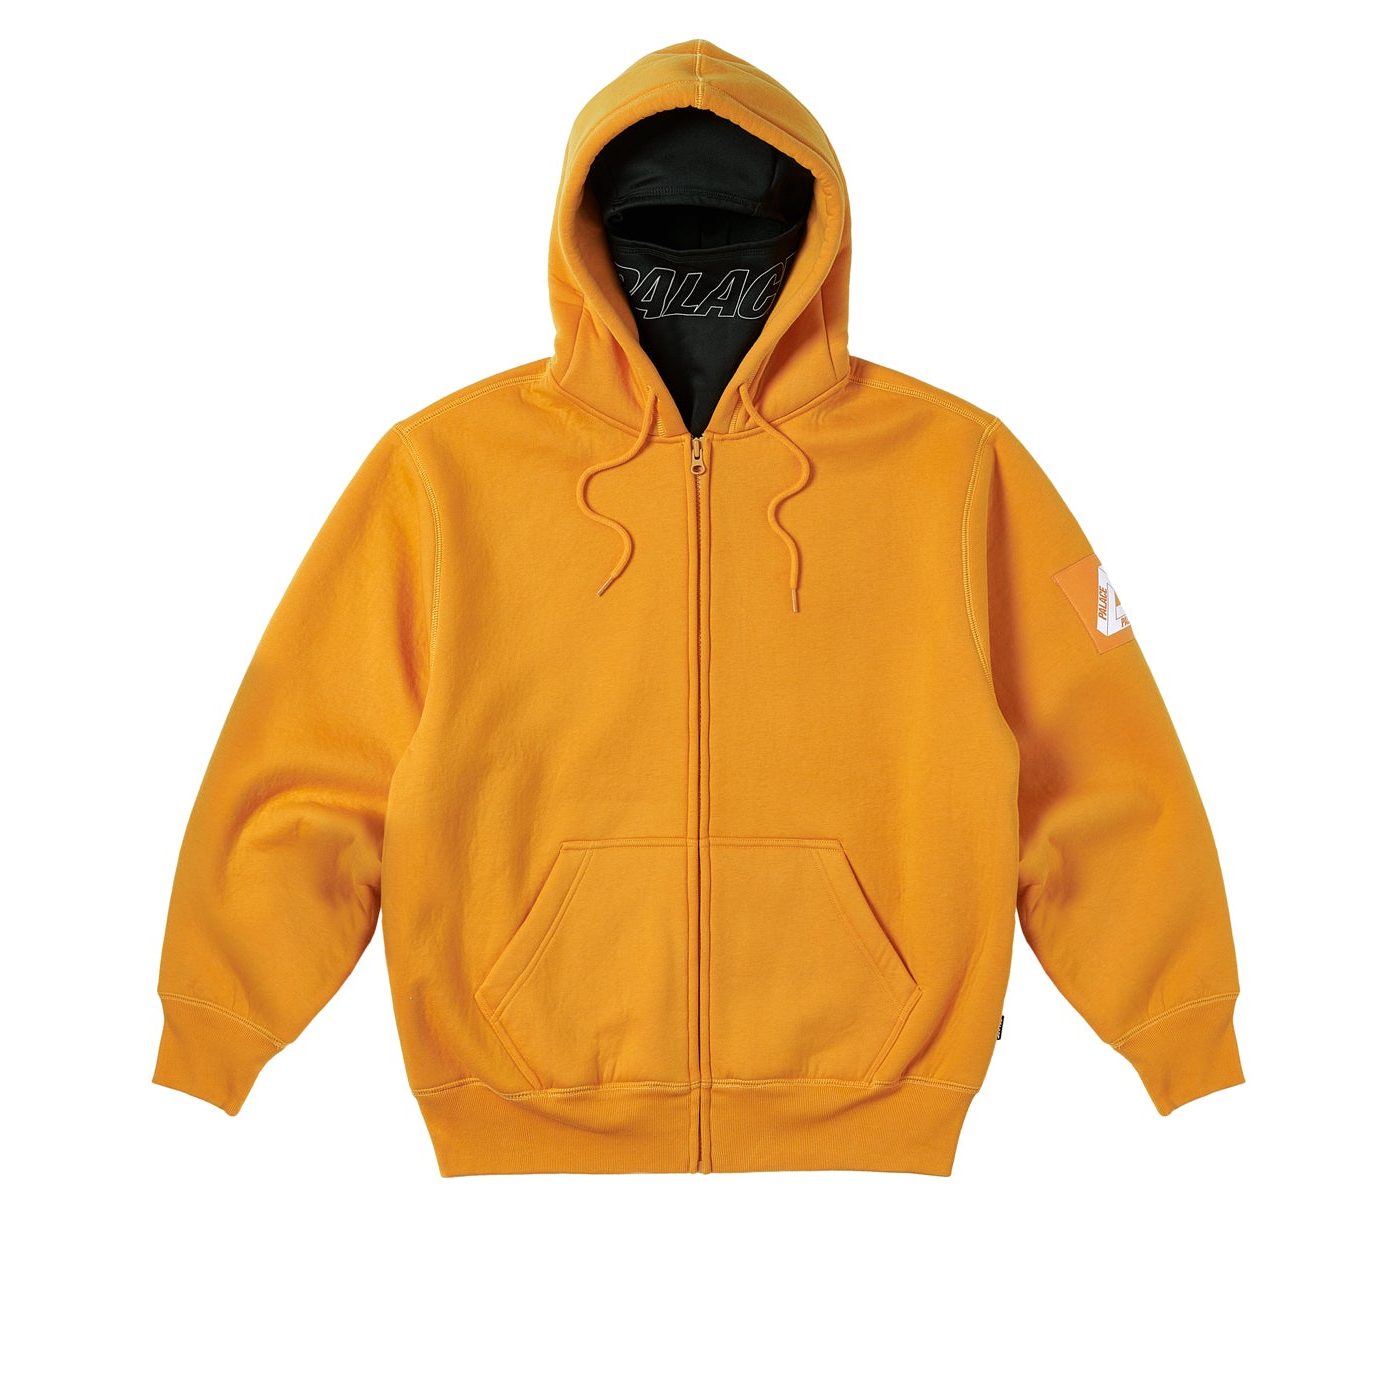 Thumbnail FACEMASK SHEARLING THERMAL HOOD ORANGE one color